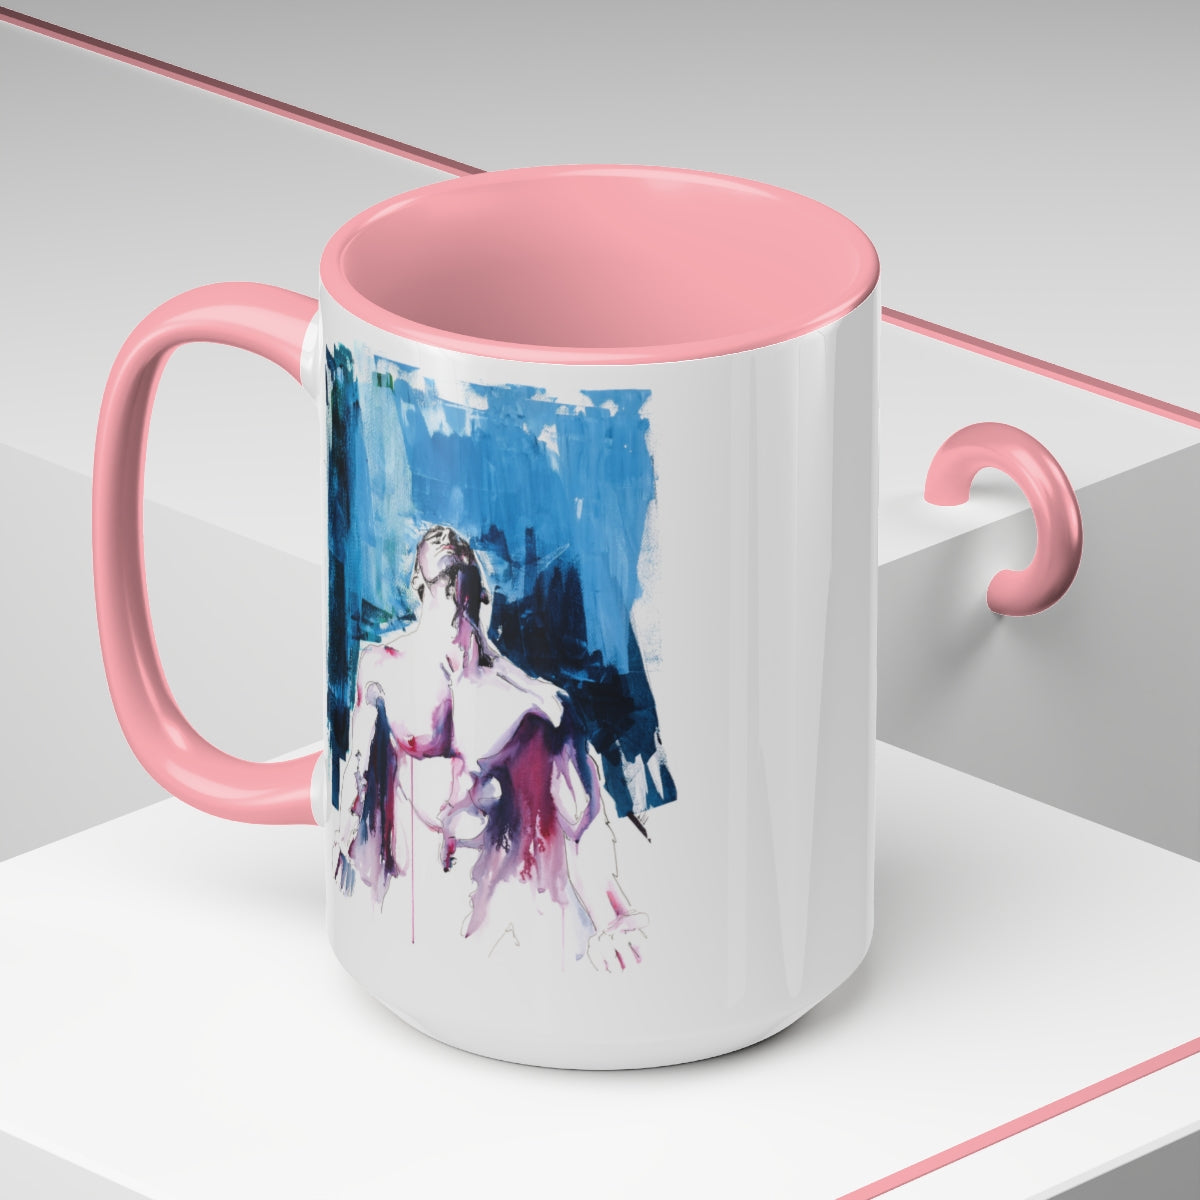 Ascension - Muscular Man Reaching for the Sky  - Two-Tone Coffee Mugs, 15oz